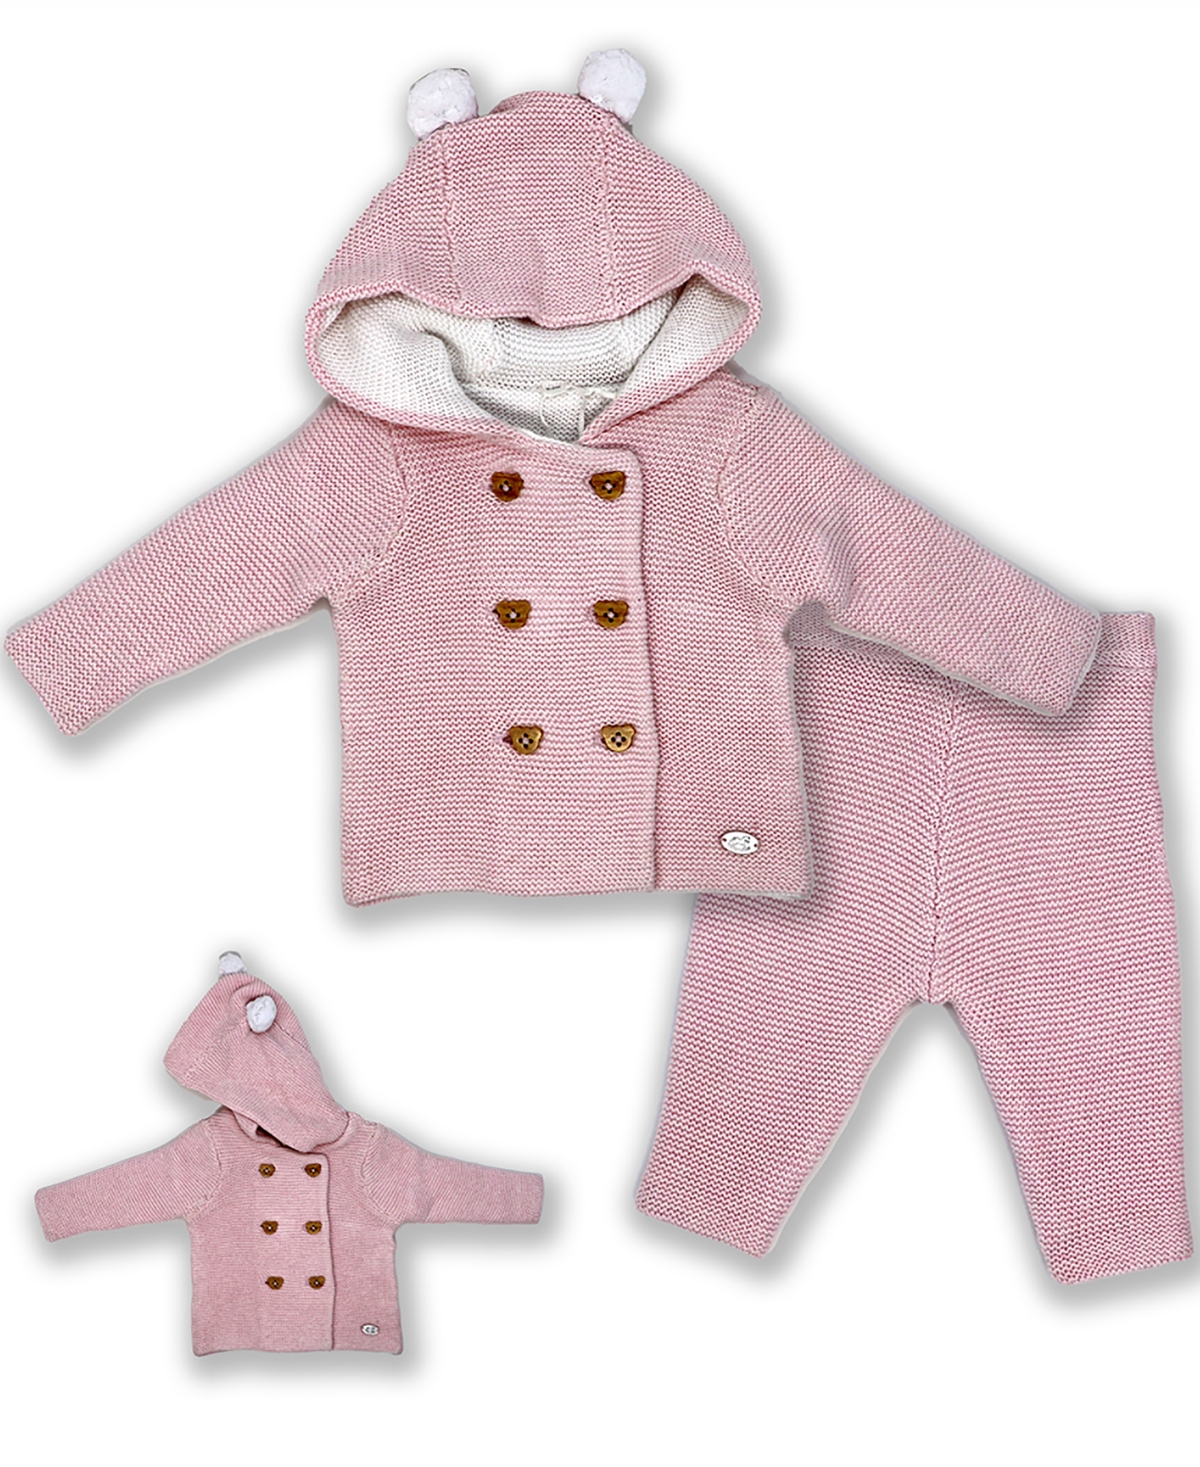 3 Stories Trading Kids' Baby Girls Knit Hooded Sweater And Pant, 2 Piece Set In Pink